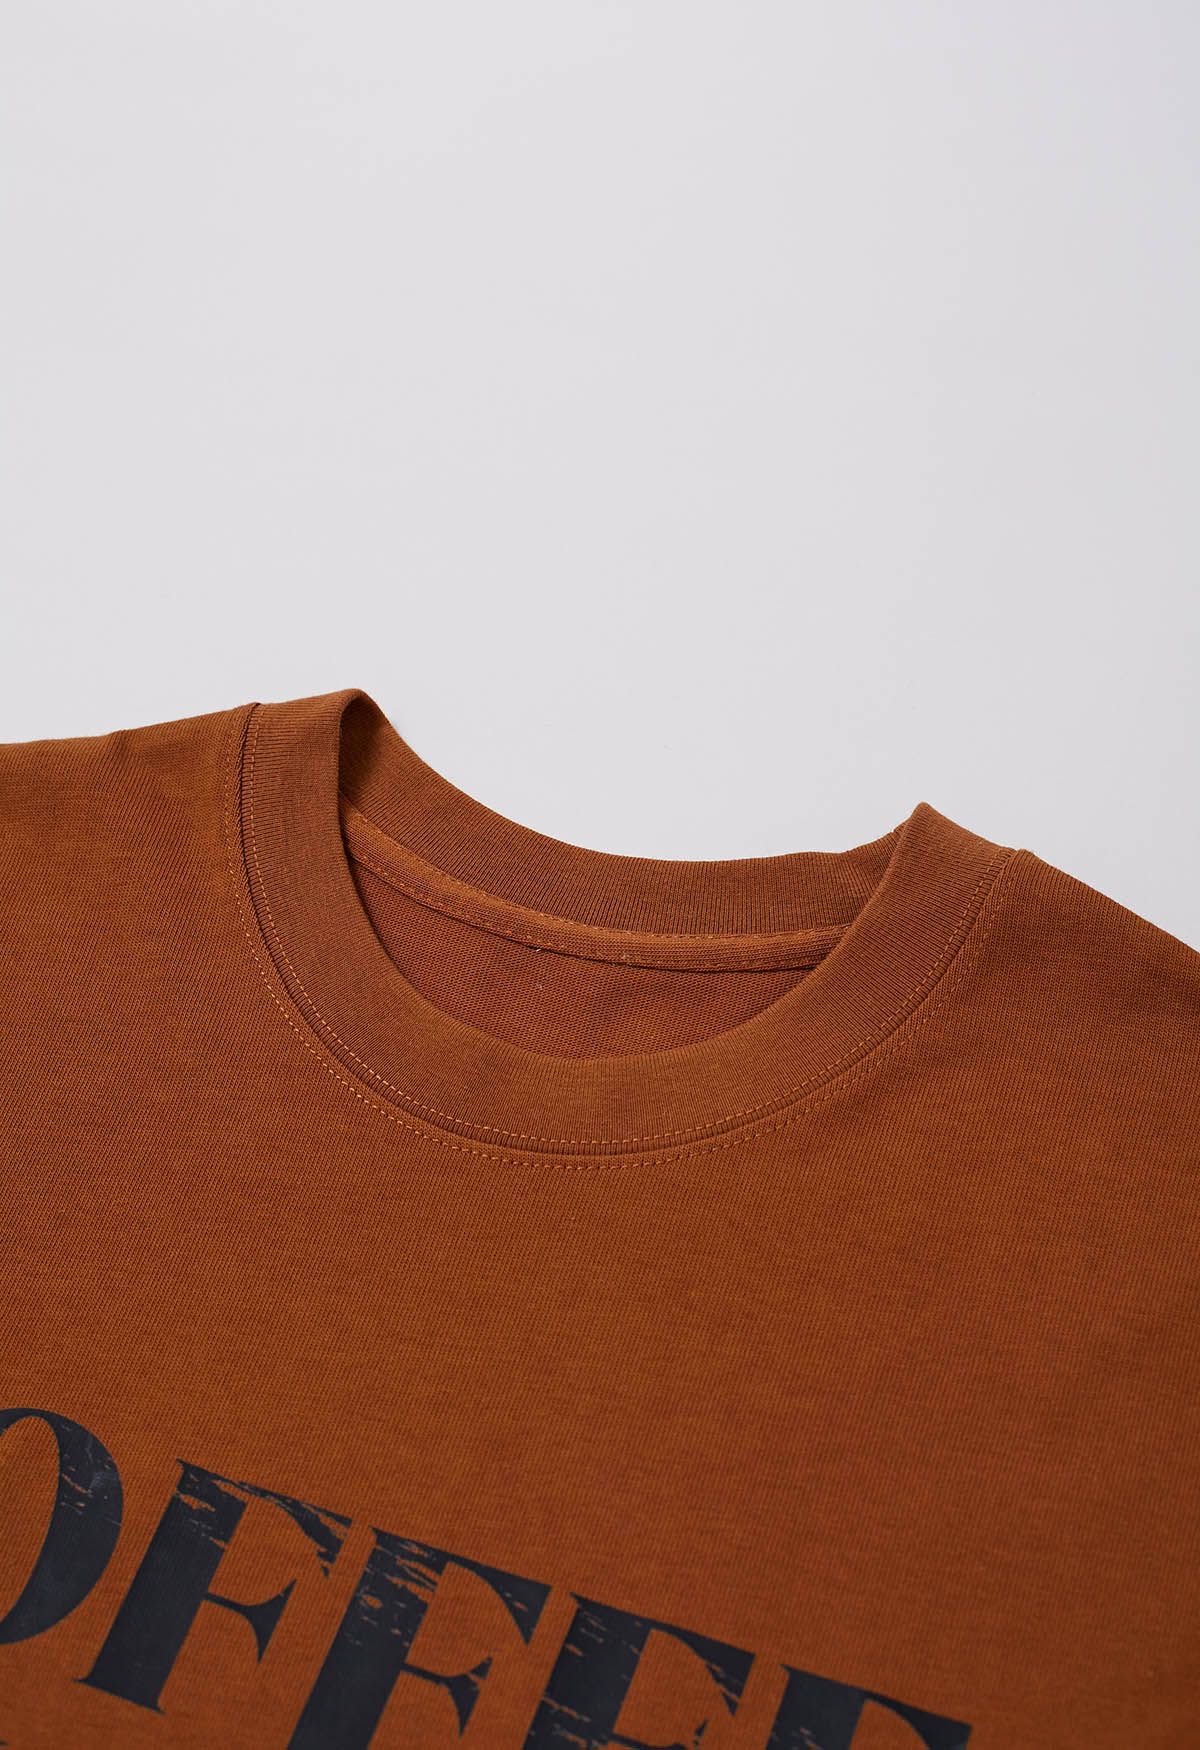 Coffee Queen Printed Cotton T-Shirt in Caramel